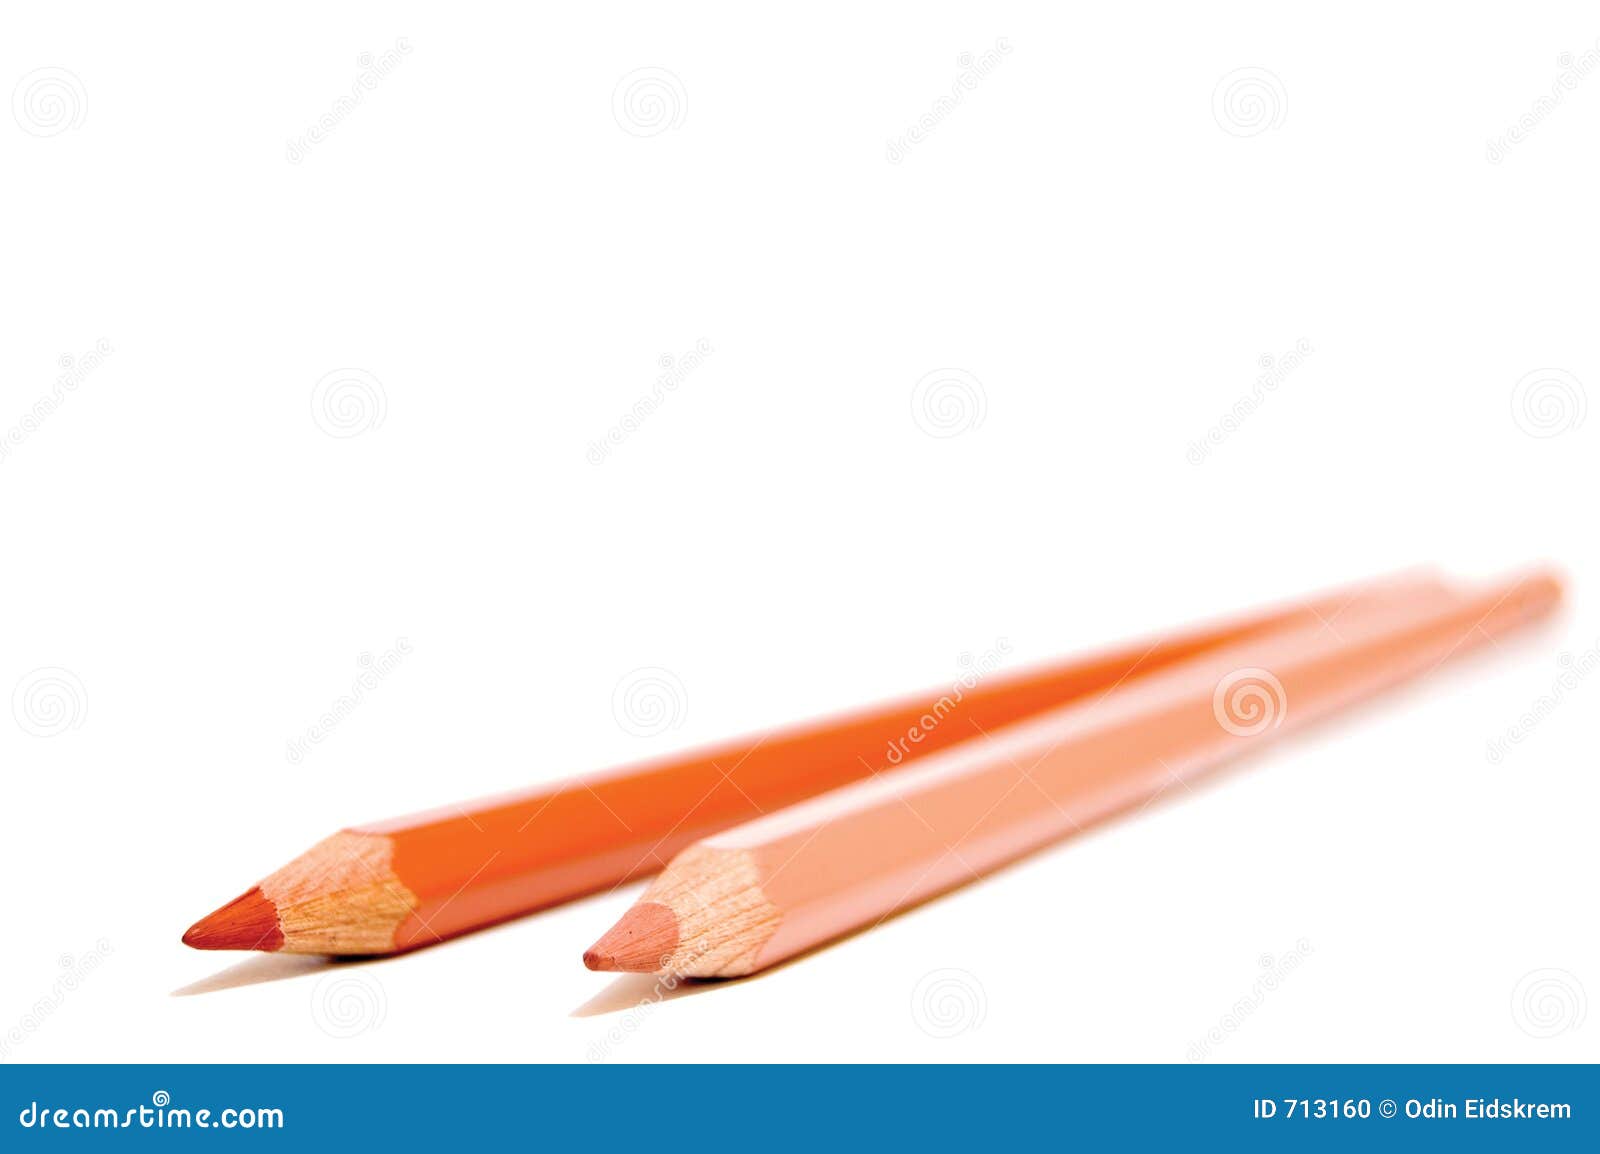 Two Skin Colored Pencils Isolated on a White Background Stock Photo - Image  of crayon, pencil: 713160